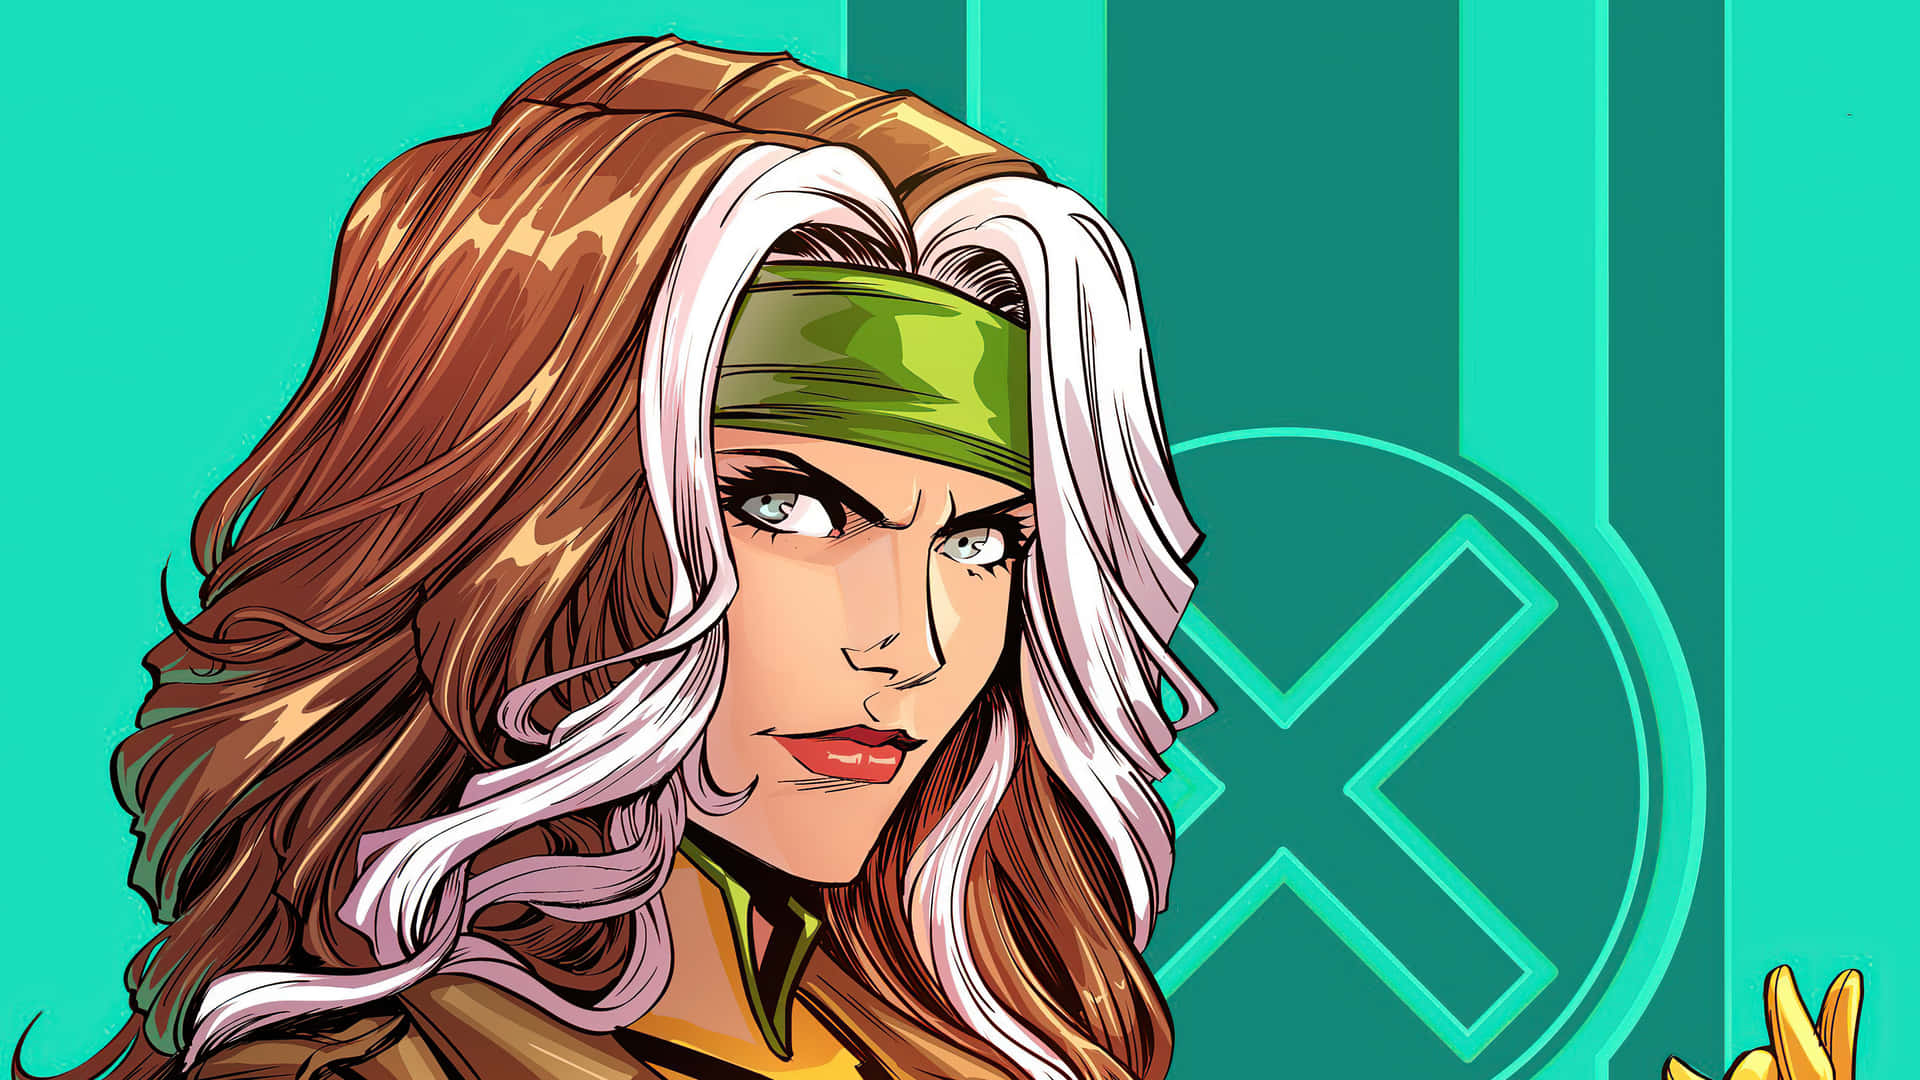 A Woman With Long Hair And Green Eyes Is Holding A Green - Colored Weapon